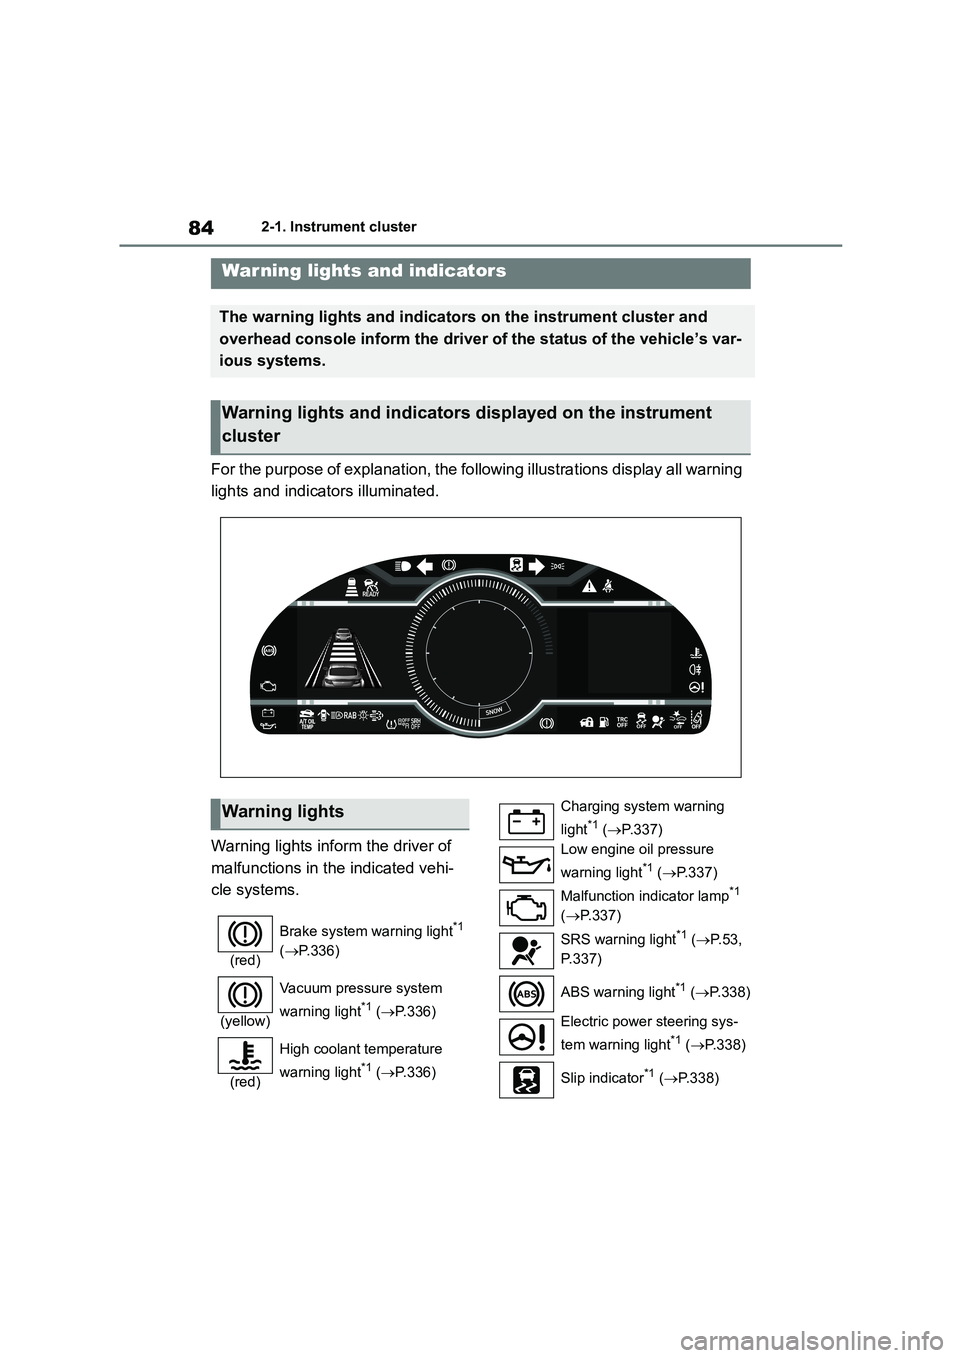 TOYOTA GR86 2022  Owners Manual (in English) 842-1. Instrument cluster
2-1.Instrument cluster
For the purpose of explanation, the following illustrations display all warning  
lights and indicators illuminated. 
Warning lights inform  the driver